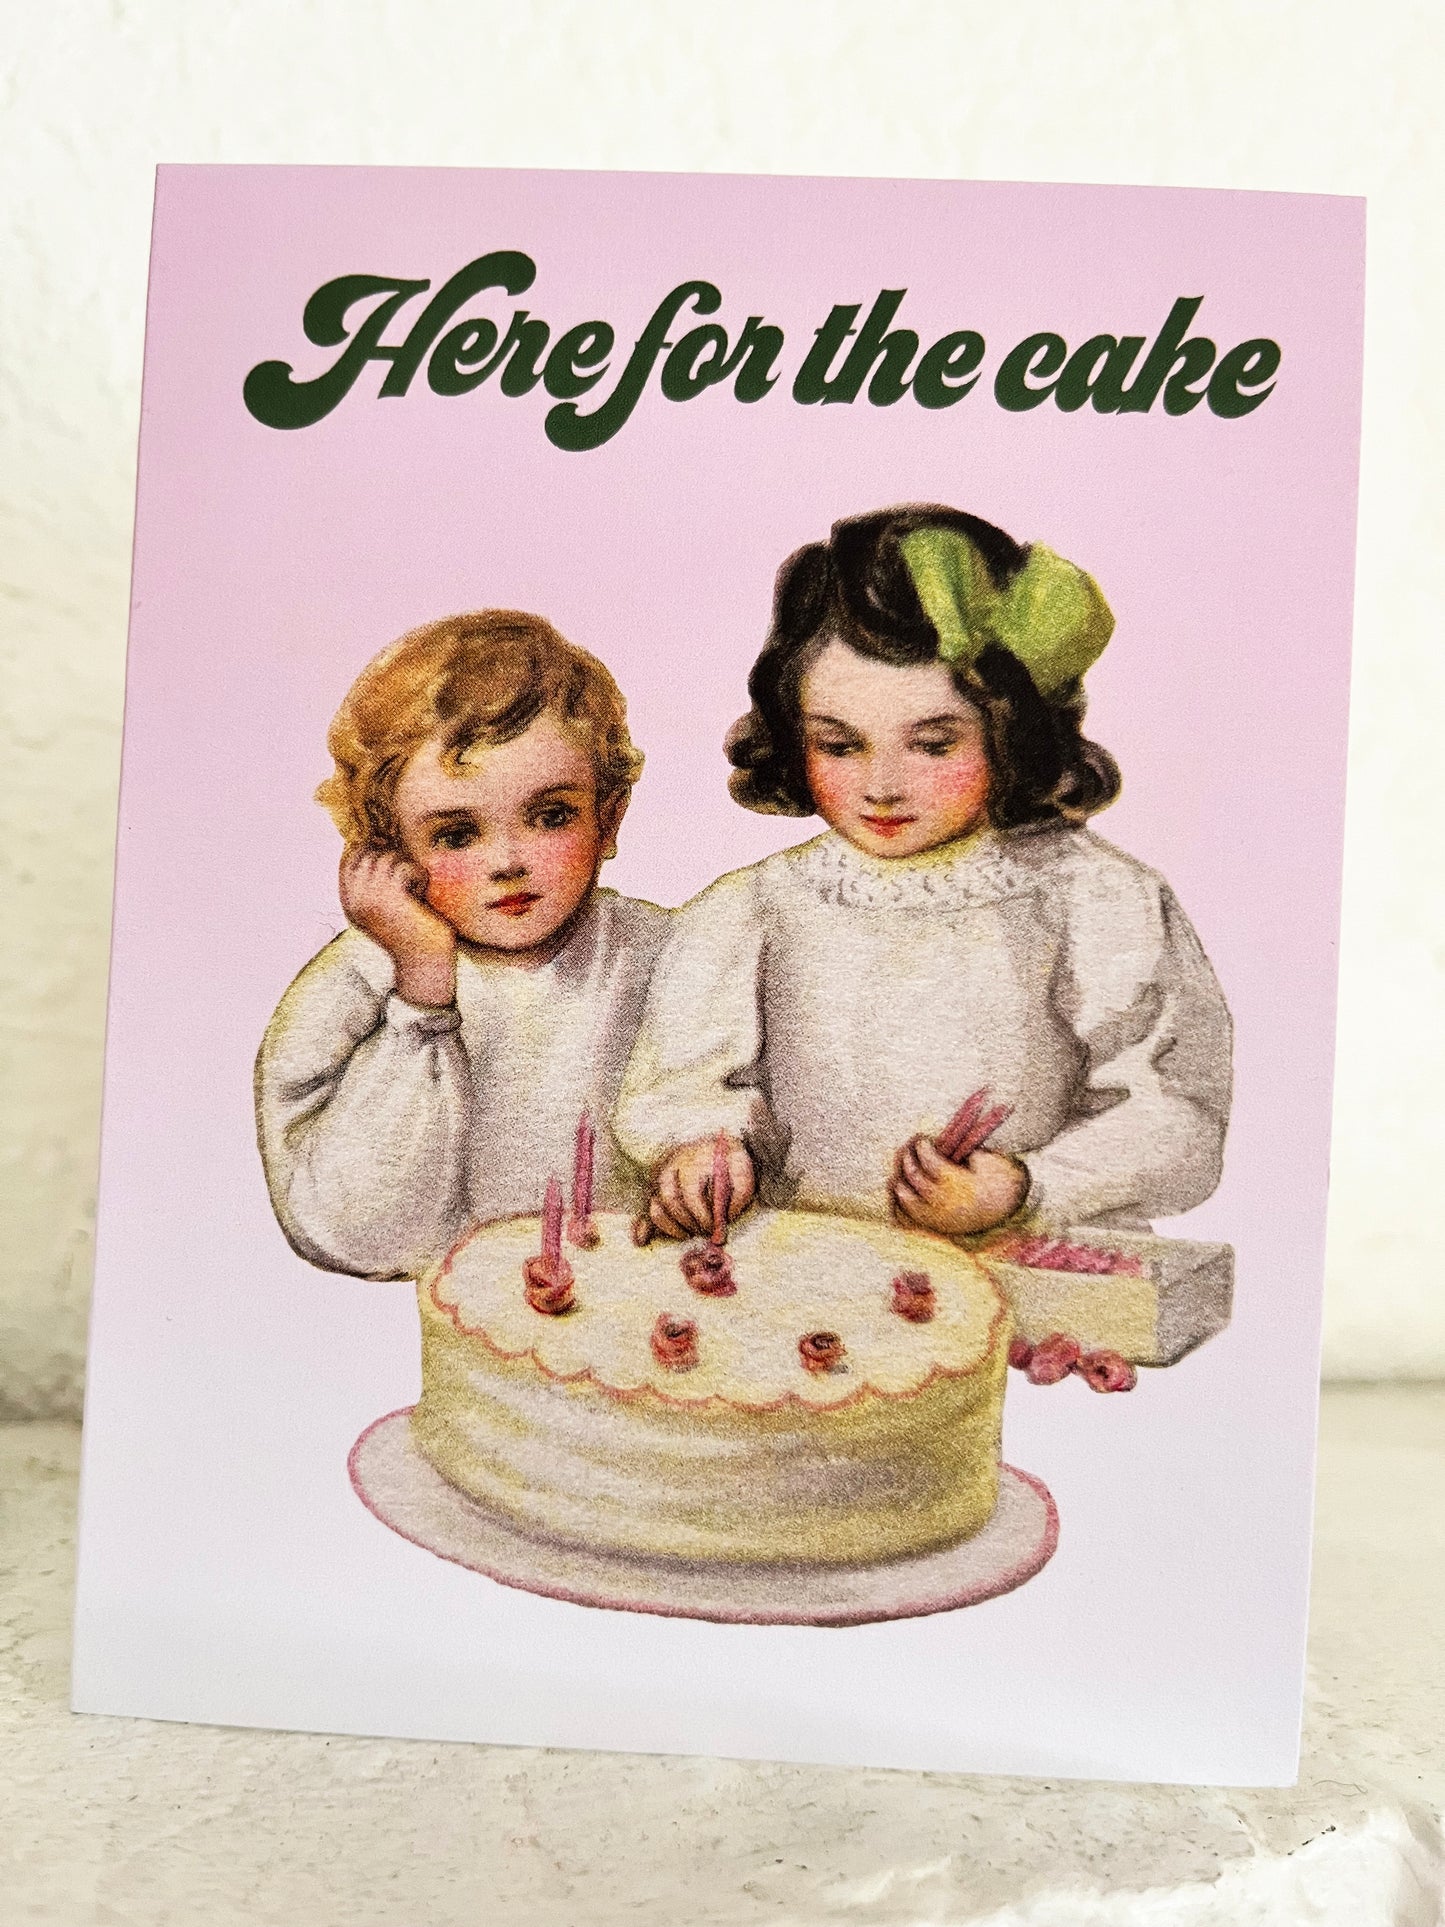 vintage retro children cute birthday cake with candles here for the cake card pastel colors fun funny coin laundry celebration greeting card funny congrats wedding snail mail